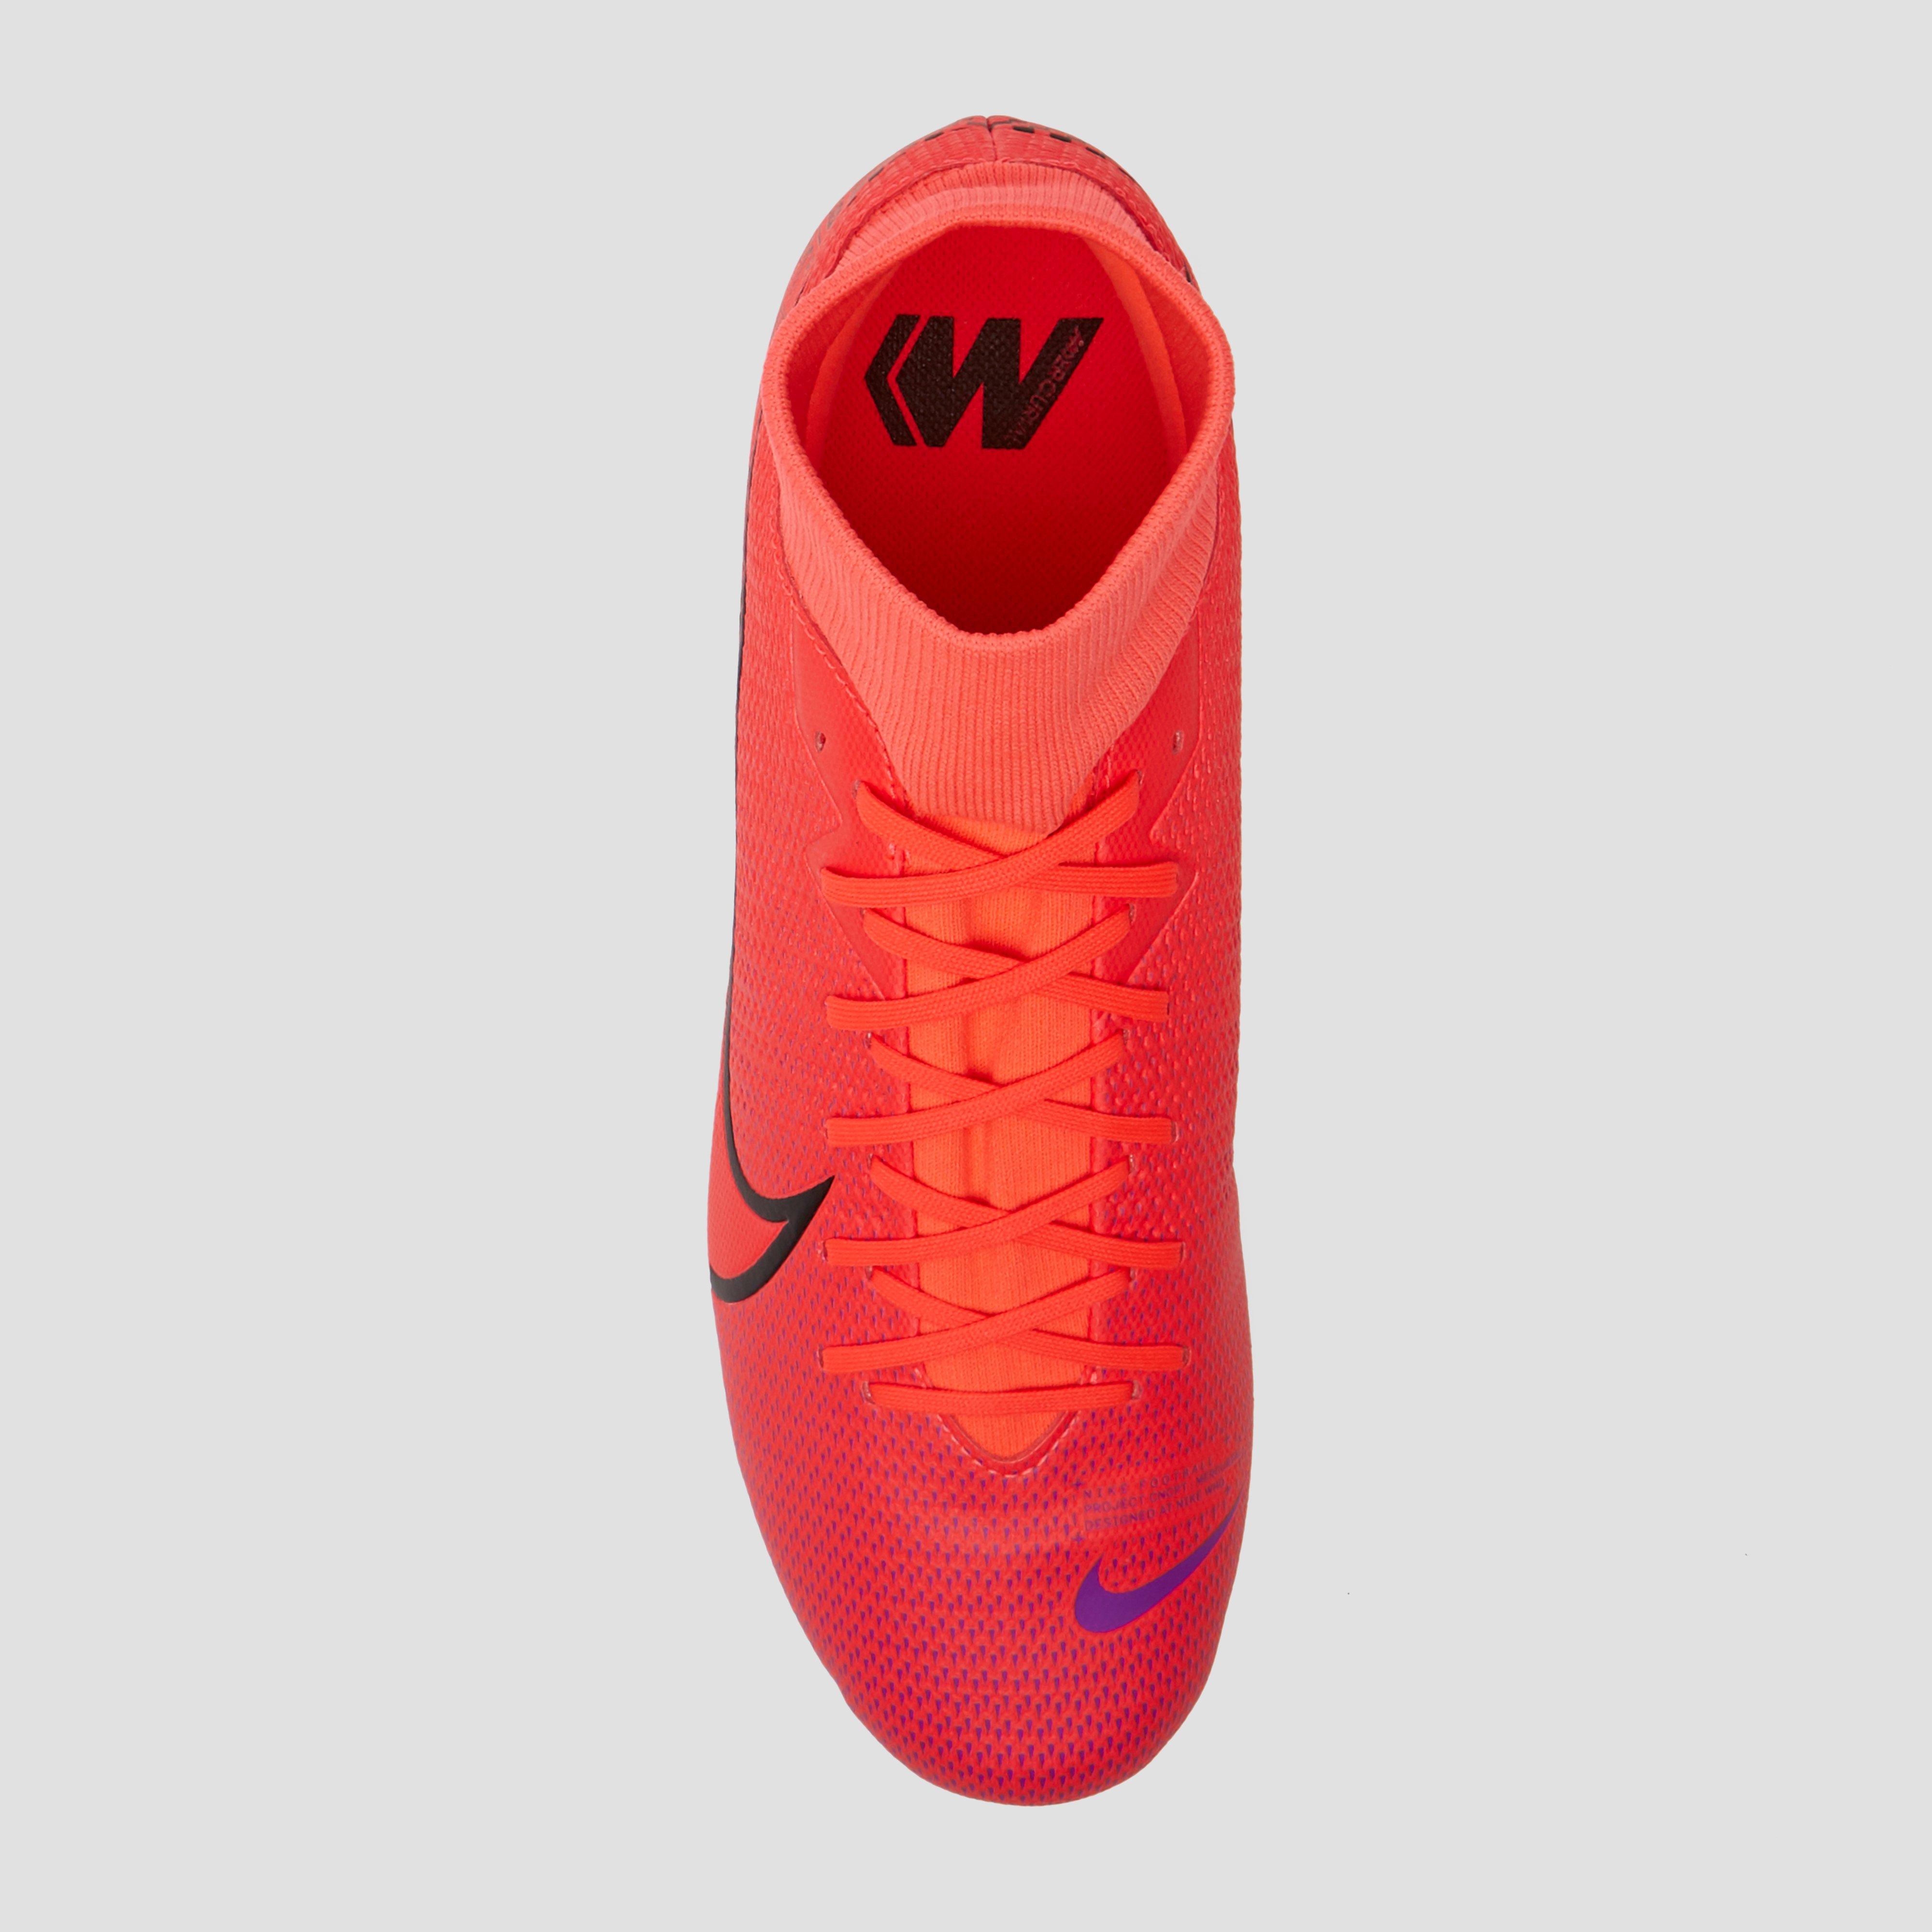 Nike MercurialX Superfly 6 Academy CR7 Indoor Soccer Shoes